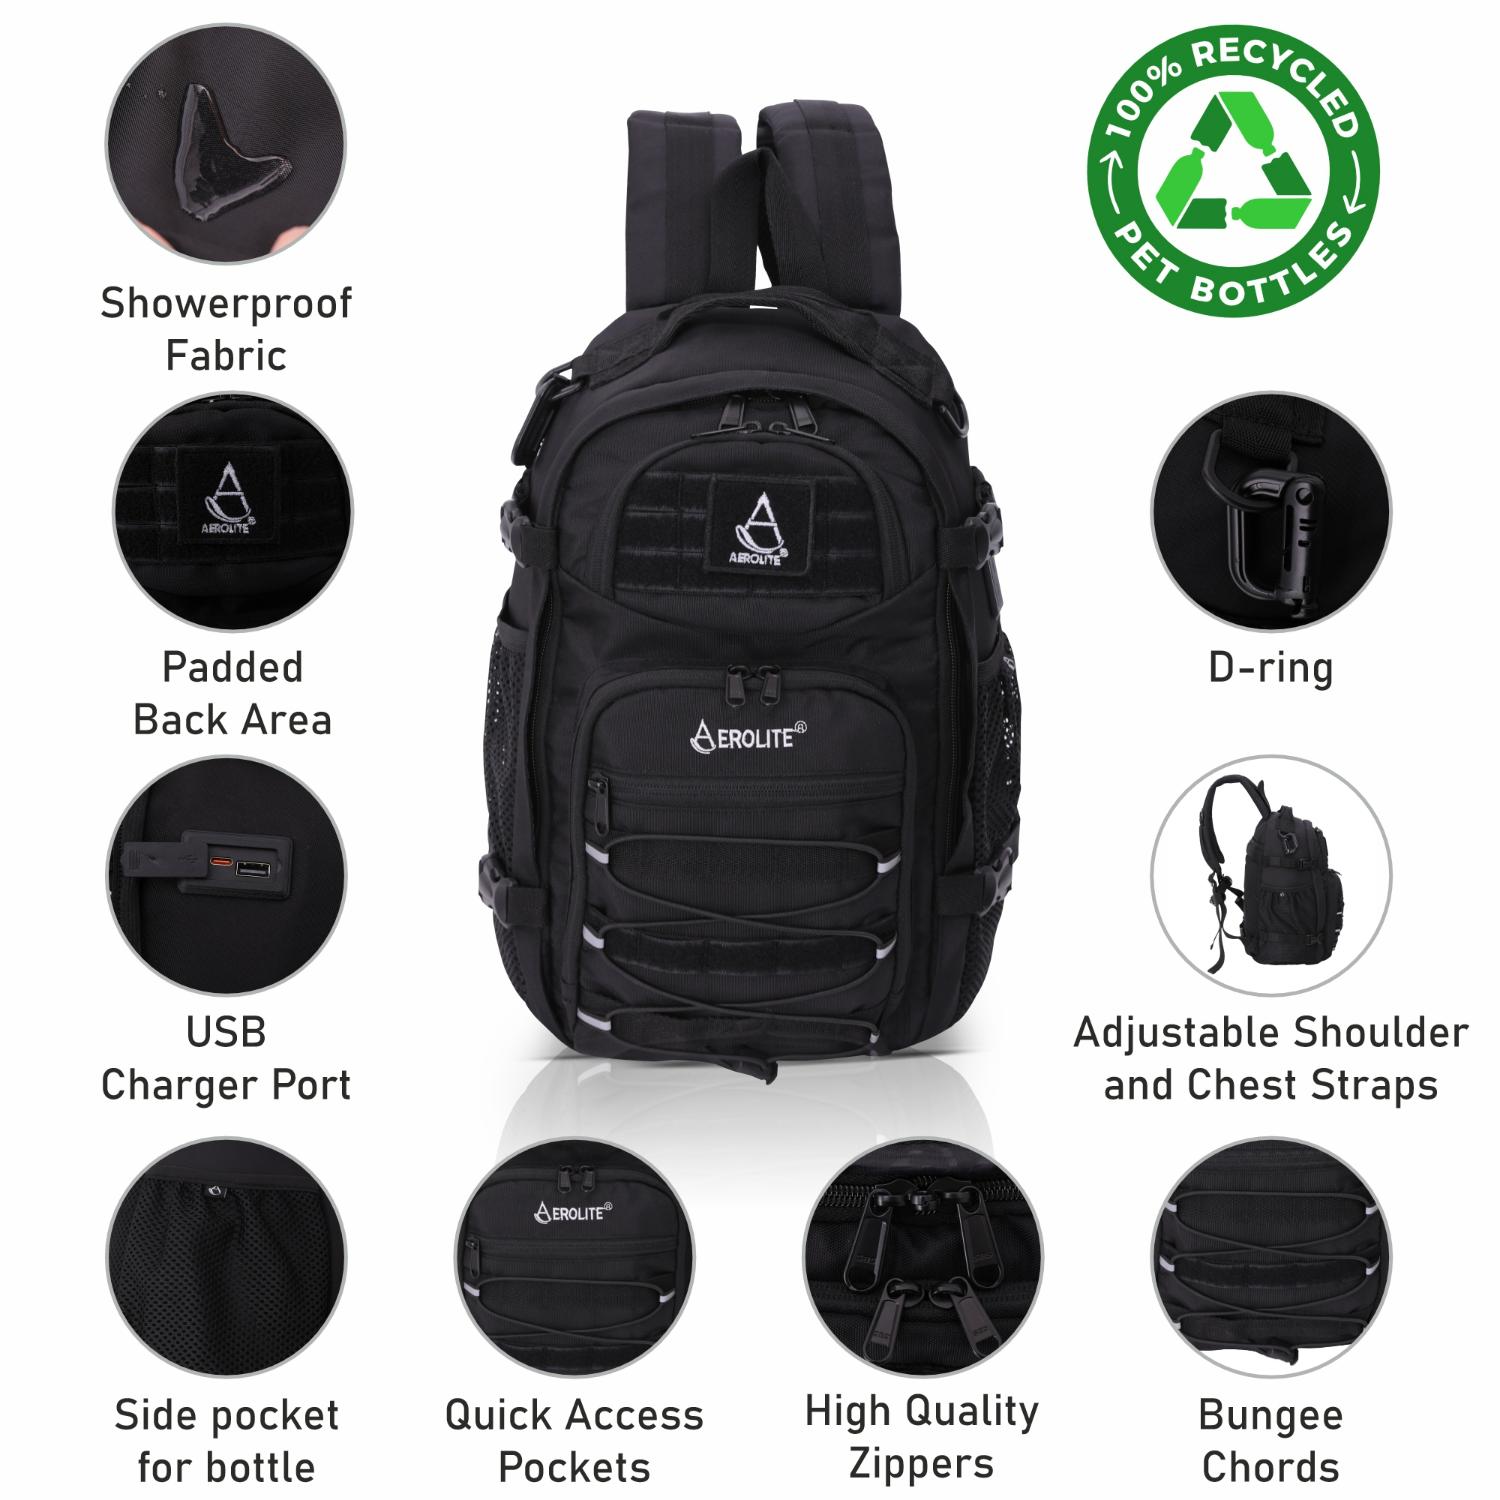 Aerolite 40x20x25 Ryanair Maximum Size Tactical Backpack Eco-Friendly Shower-Resistant Cabin Luggage Camping Hiking Trekking 20L Approved Travel Carry On Flight Rucksack with 10 Year Warranty - Aerolite UK